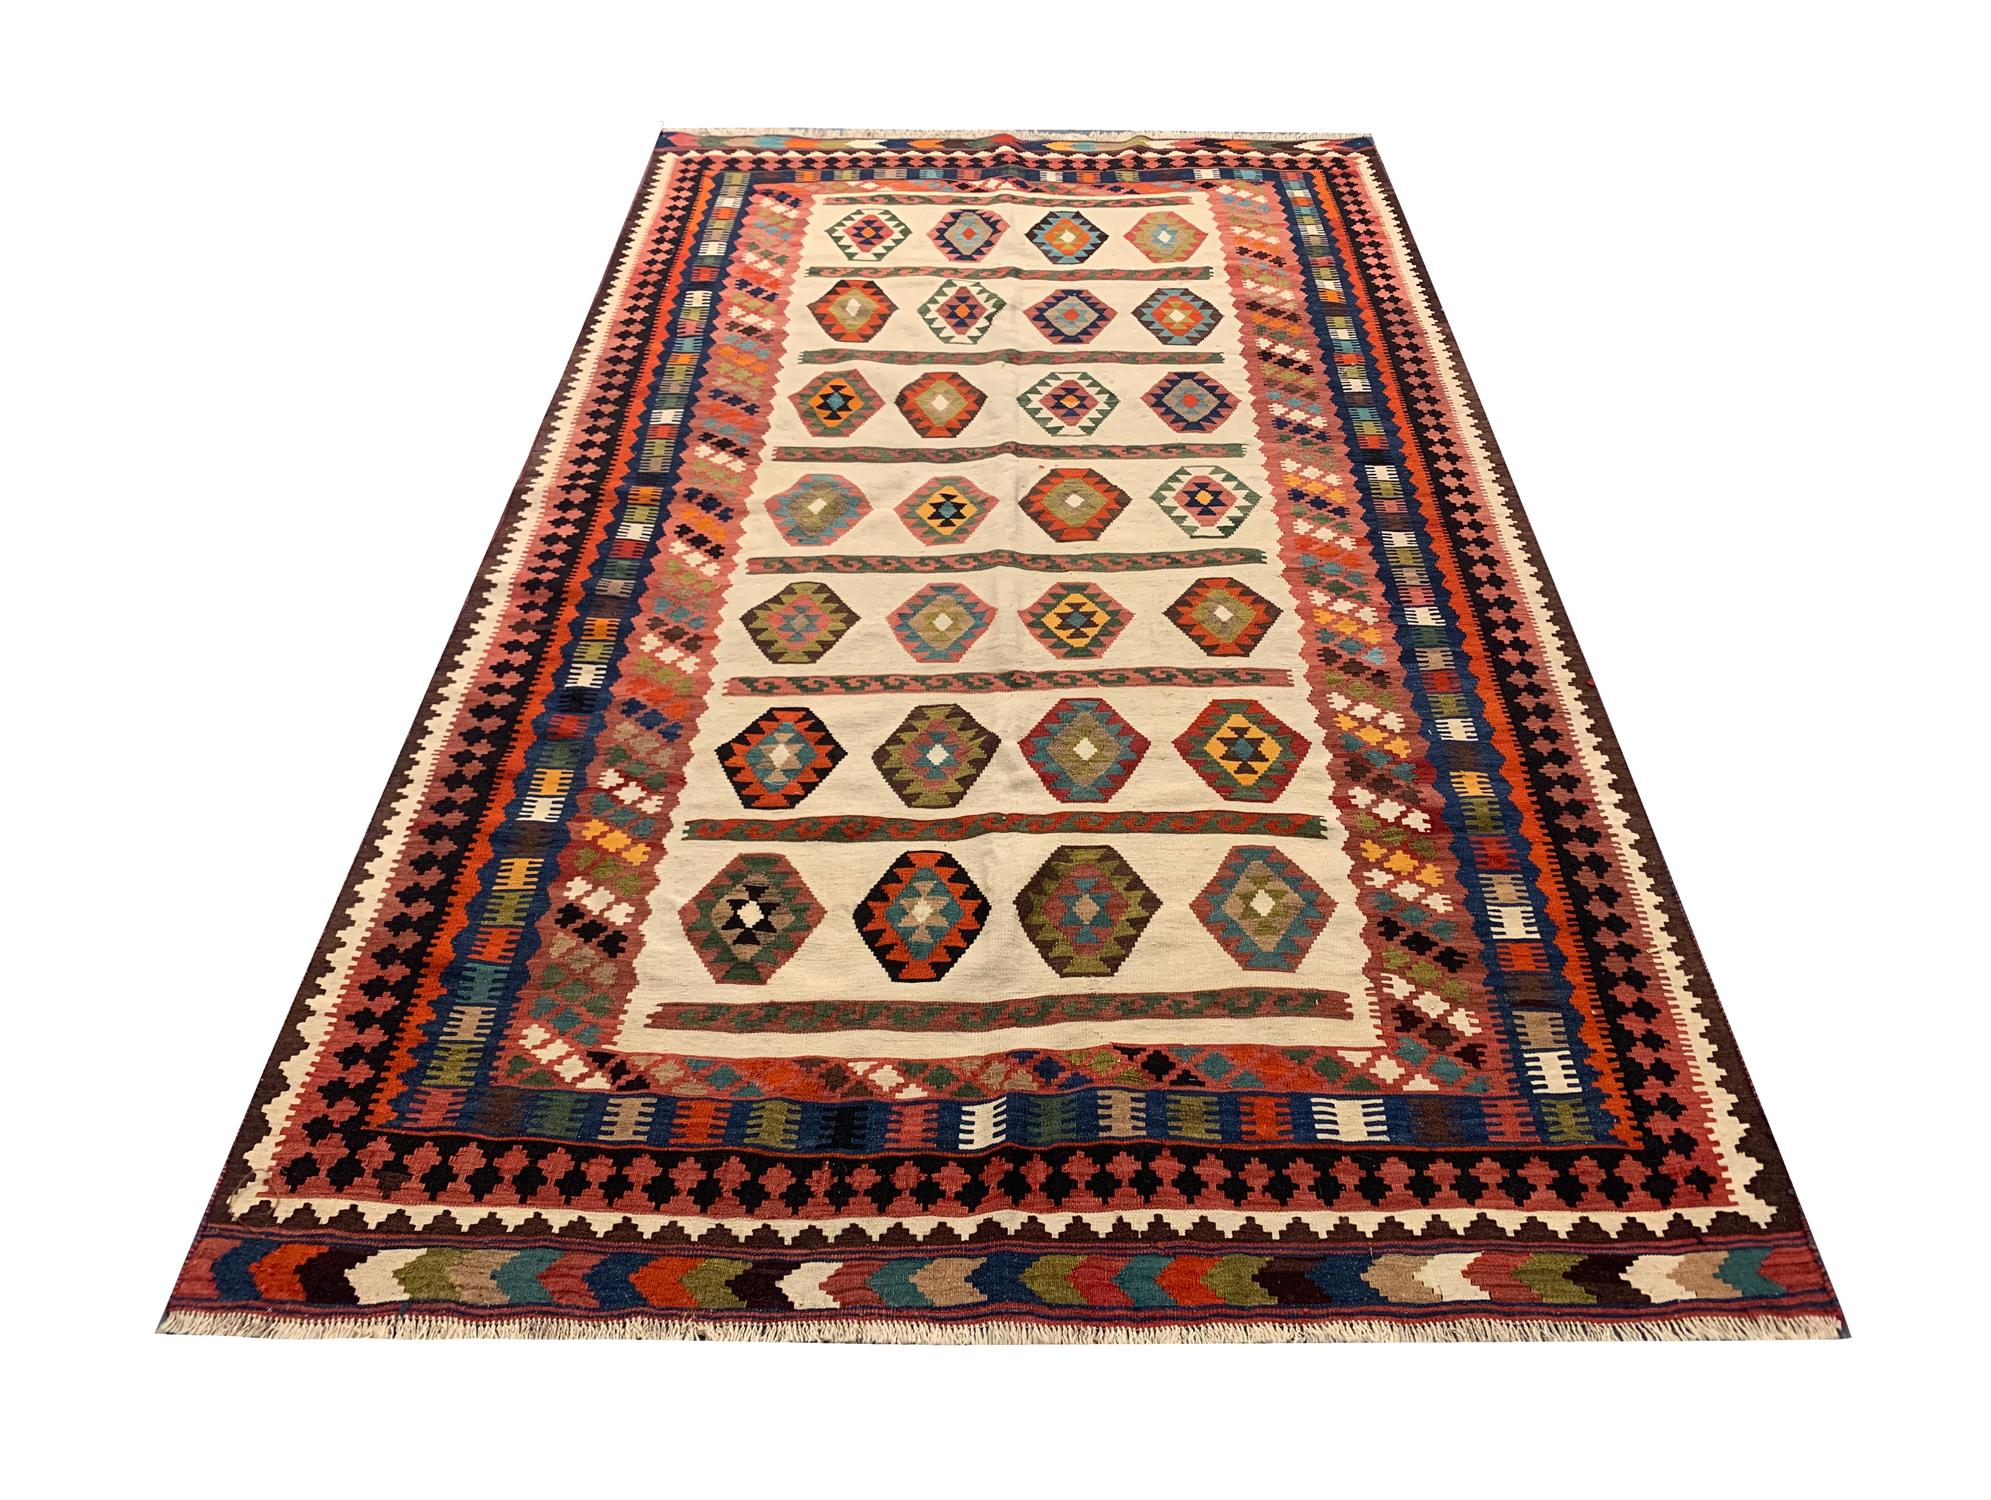 This fine wool rug has featured a bold geometric tribal motif design in accents of green, pink, orange and blue with a cream background and a thick layered border made up of repeat patterns. Both the colour palette and design of this wool rug are